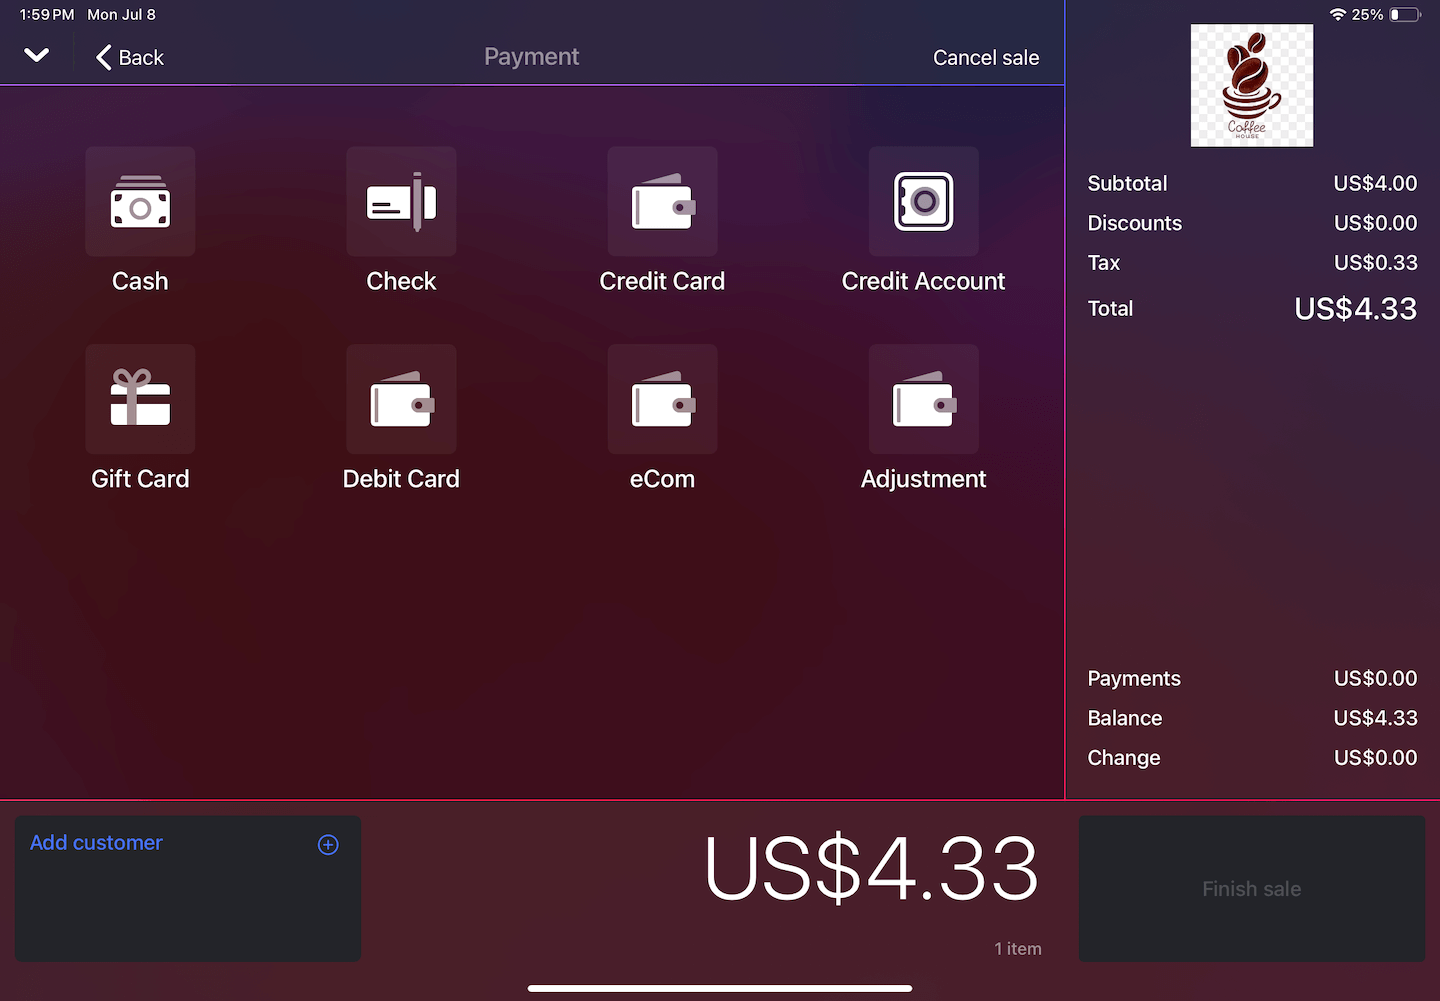 Sale with payment types options shown.